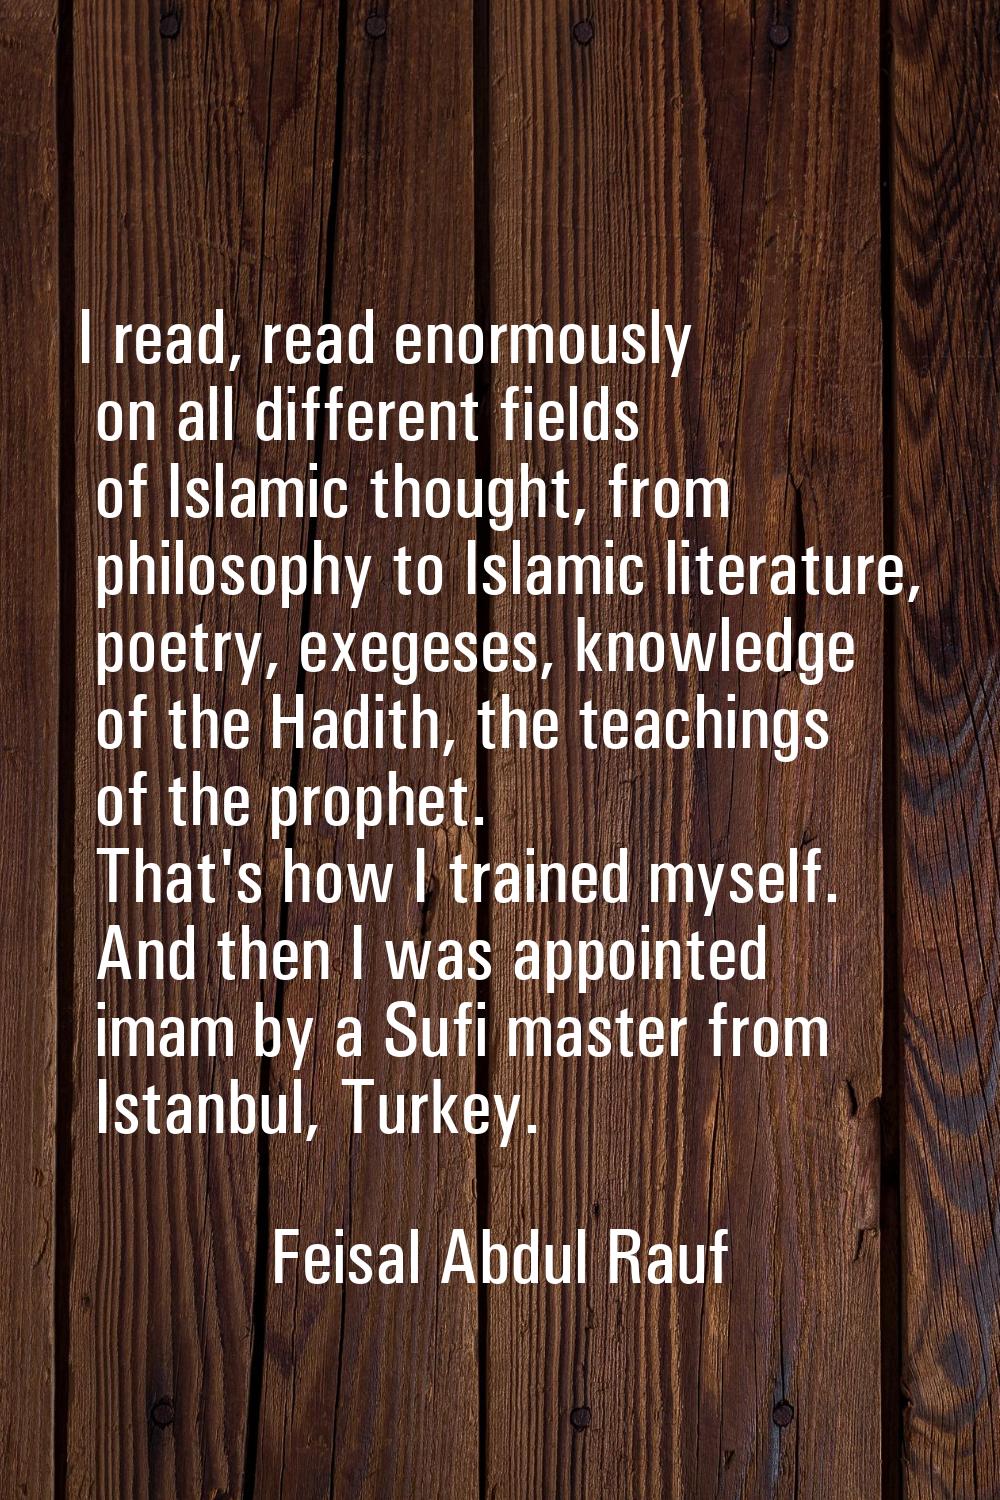 I read, read enormously on all different fields of Islamic thought, from philosophy to Islamic lite